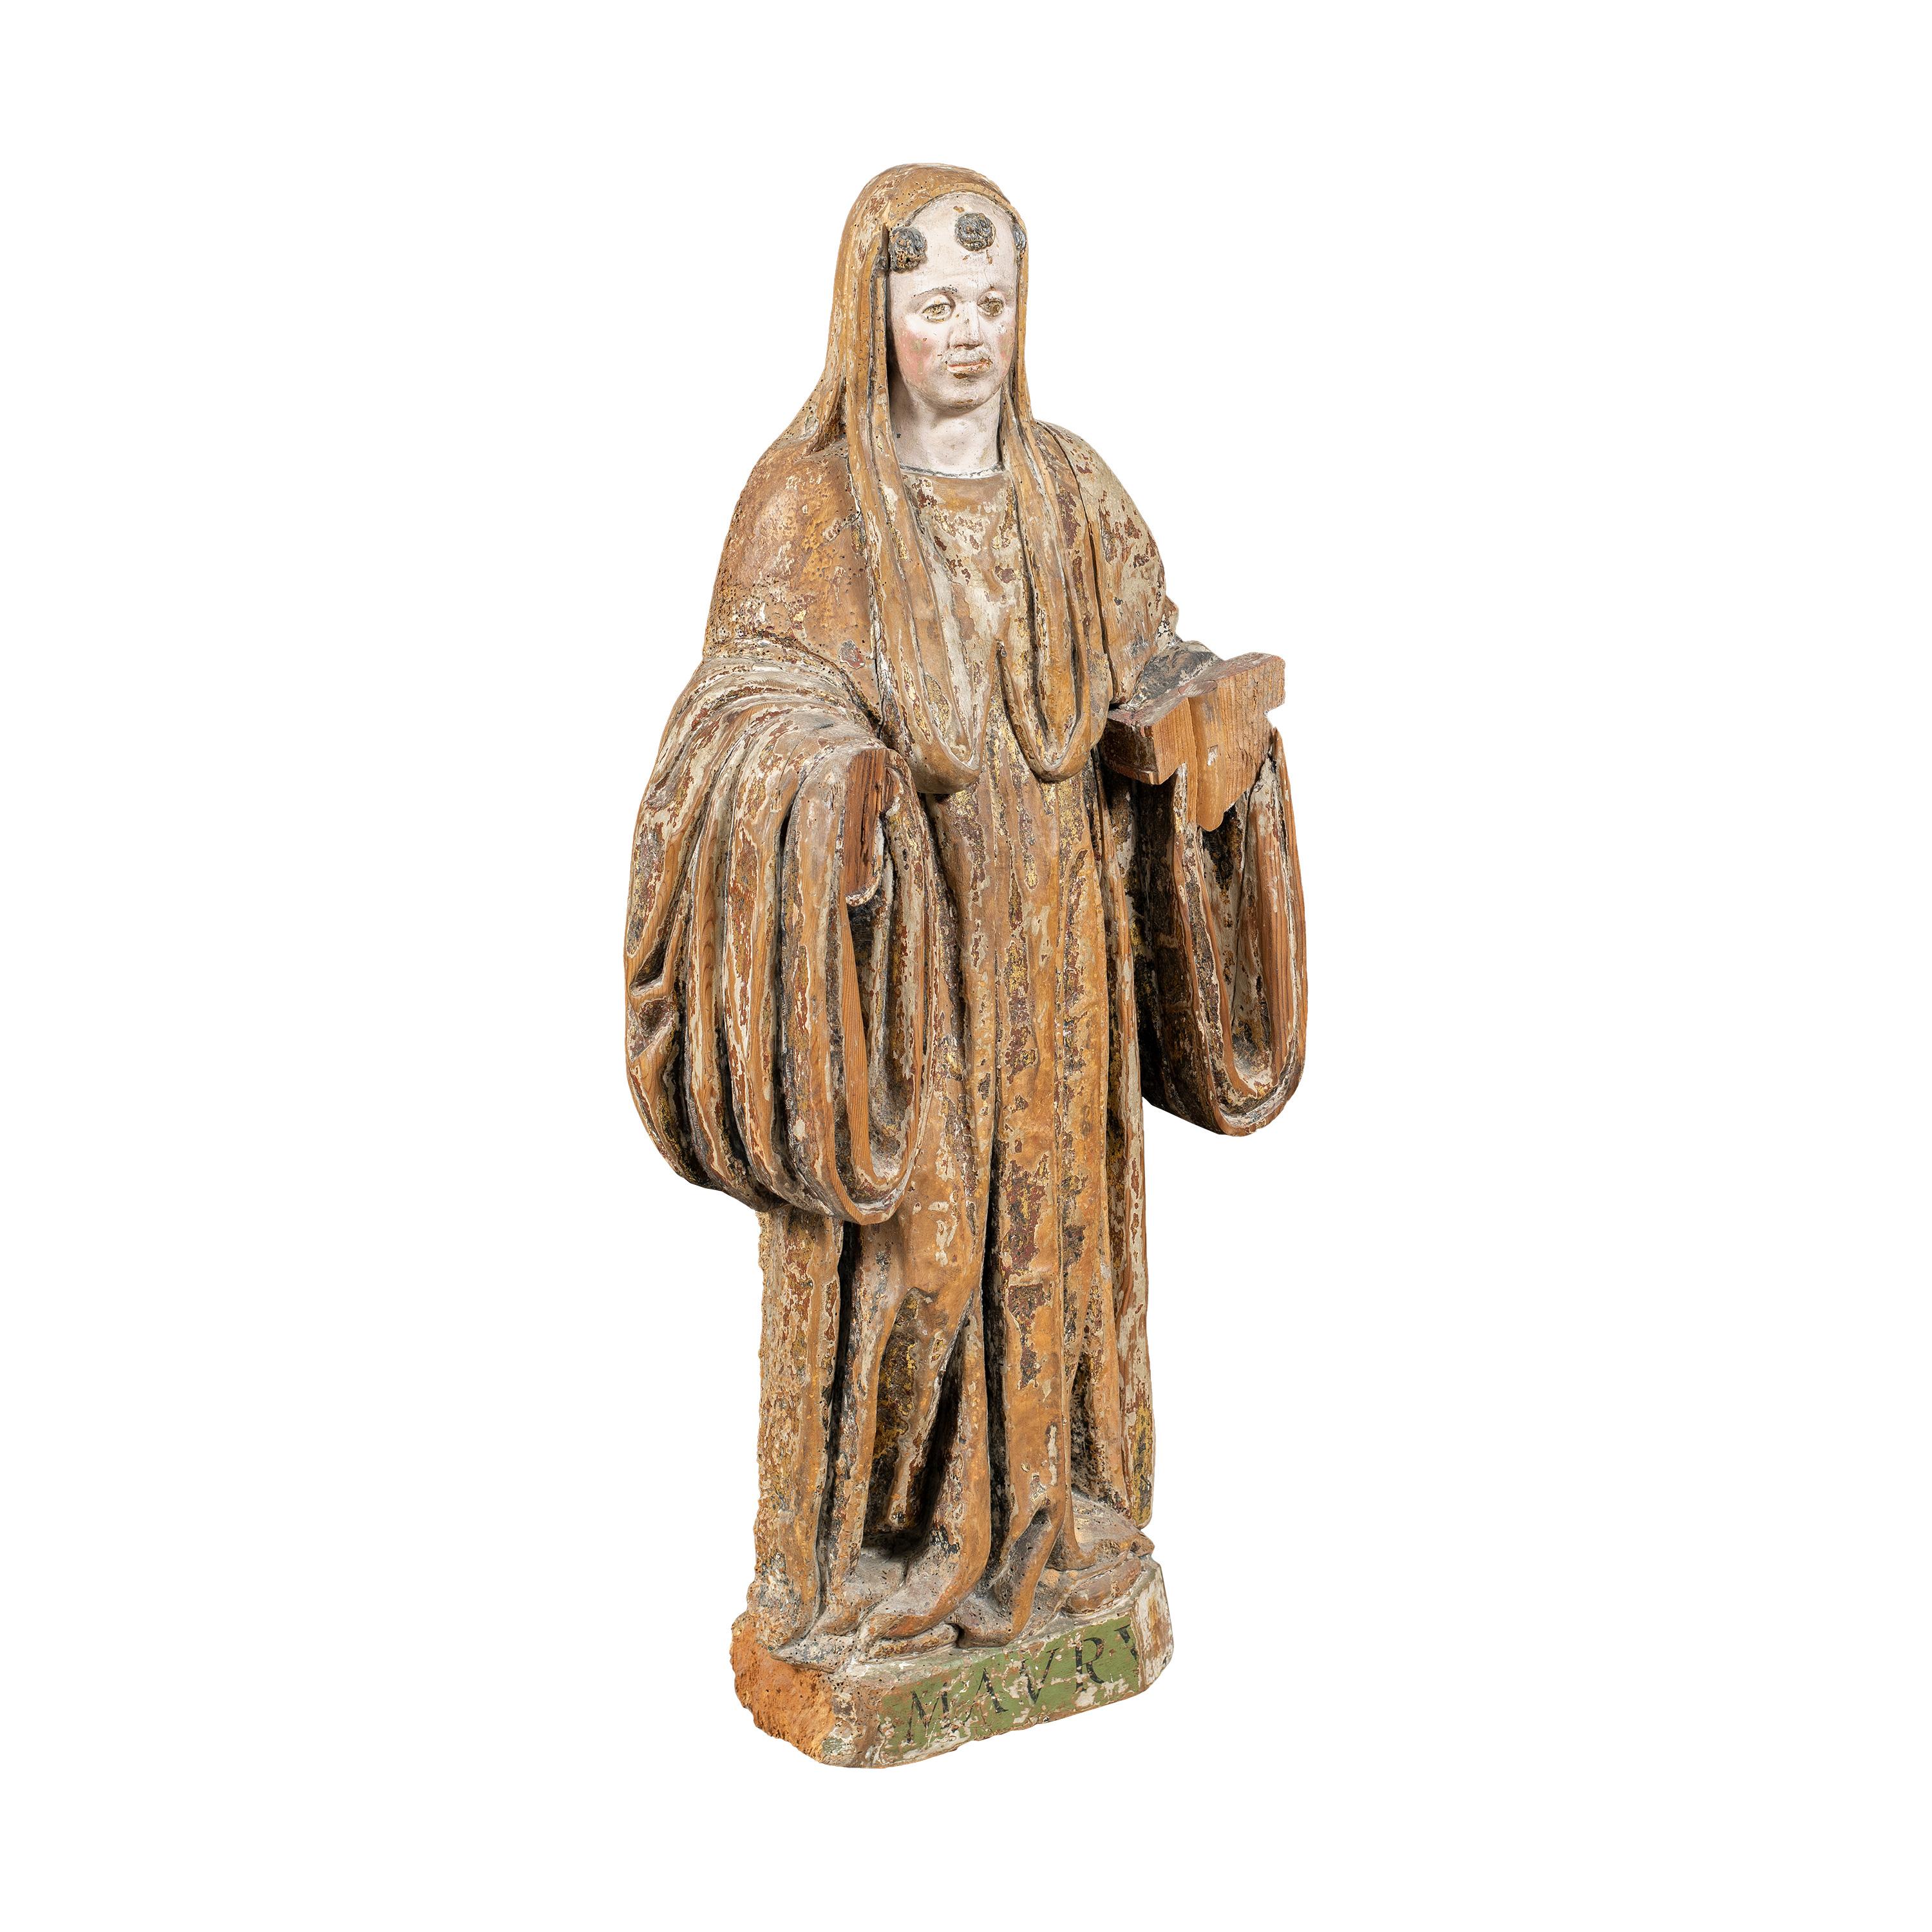 16th century Italian carved wood sculpture - Saint Mauritius - Gilded Painted - Sculpture by Unknown